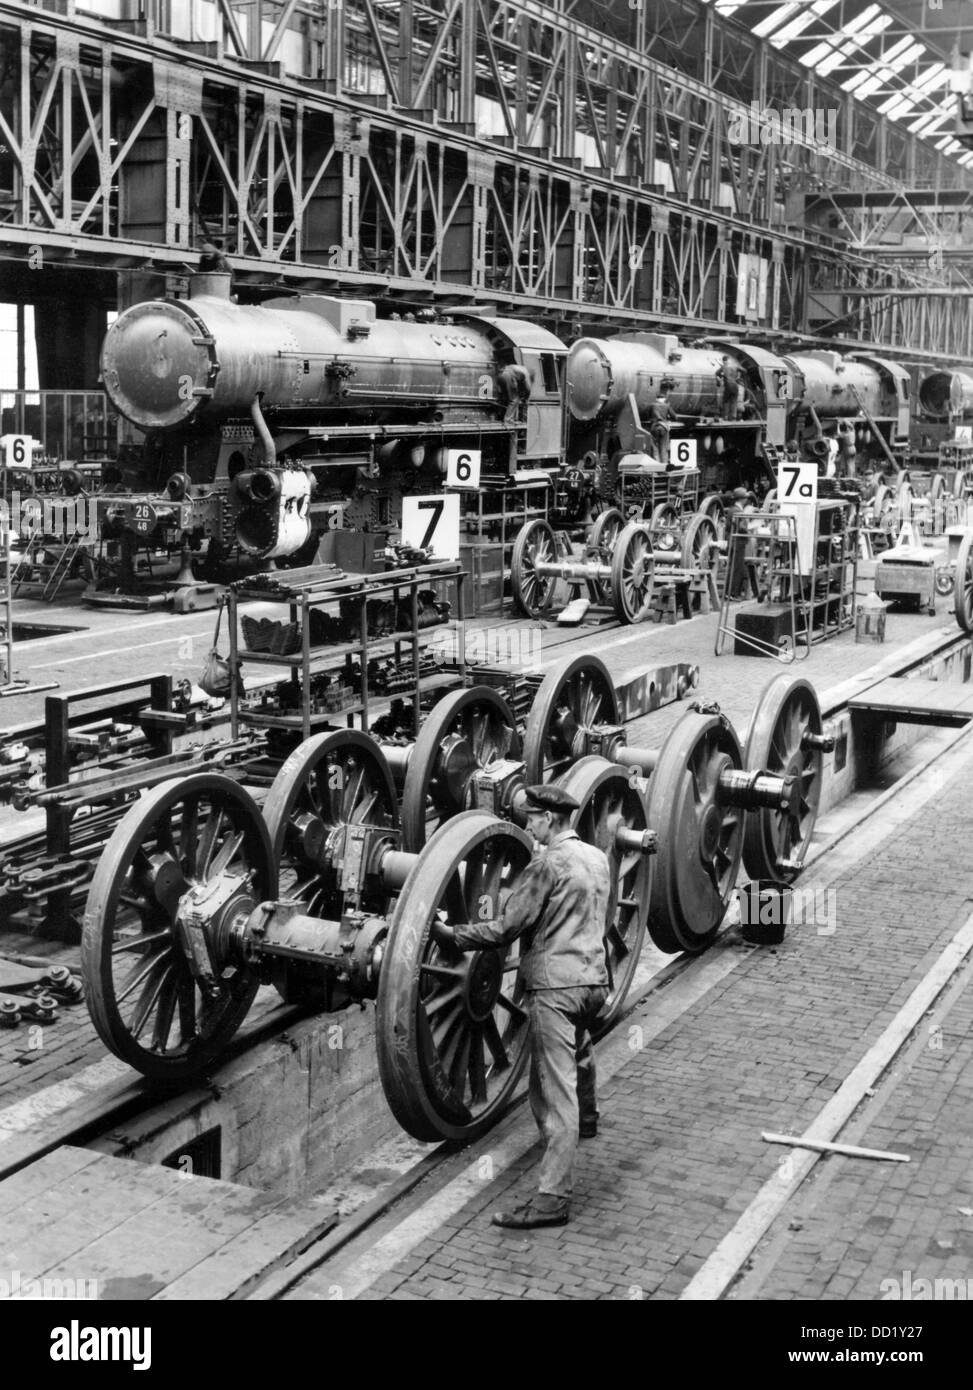 View of the production of a war locomotive series 52 at the Berliner Maschinenbau AG in Wildau, Germany, in August 1943. The construction of a locomotive well-suited for the employment in war should ensure adequate supplying of the territories in the East occupied by the German Wehrmacht. Photo: Bildarchiv der Eisenbahnstiftung/RVM (minimum fee 60 euros) Stock Photo